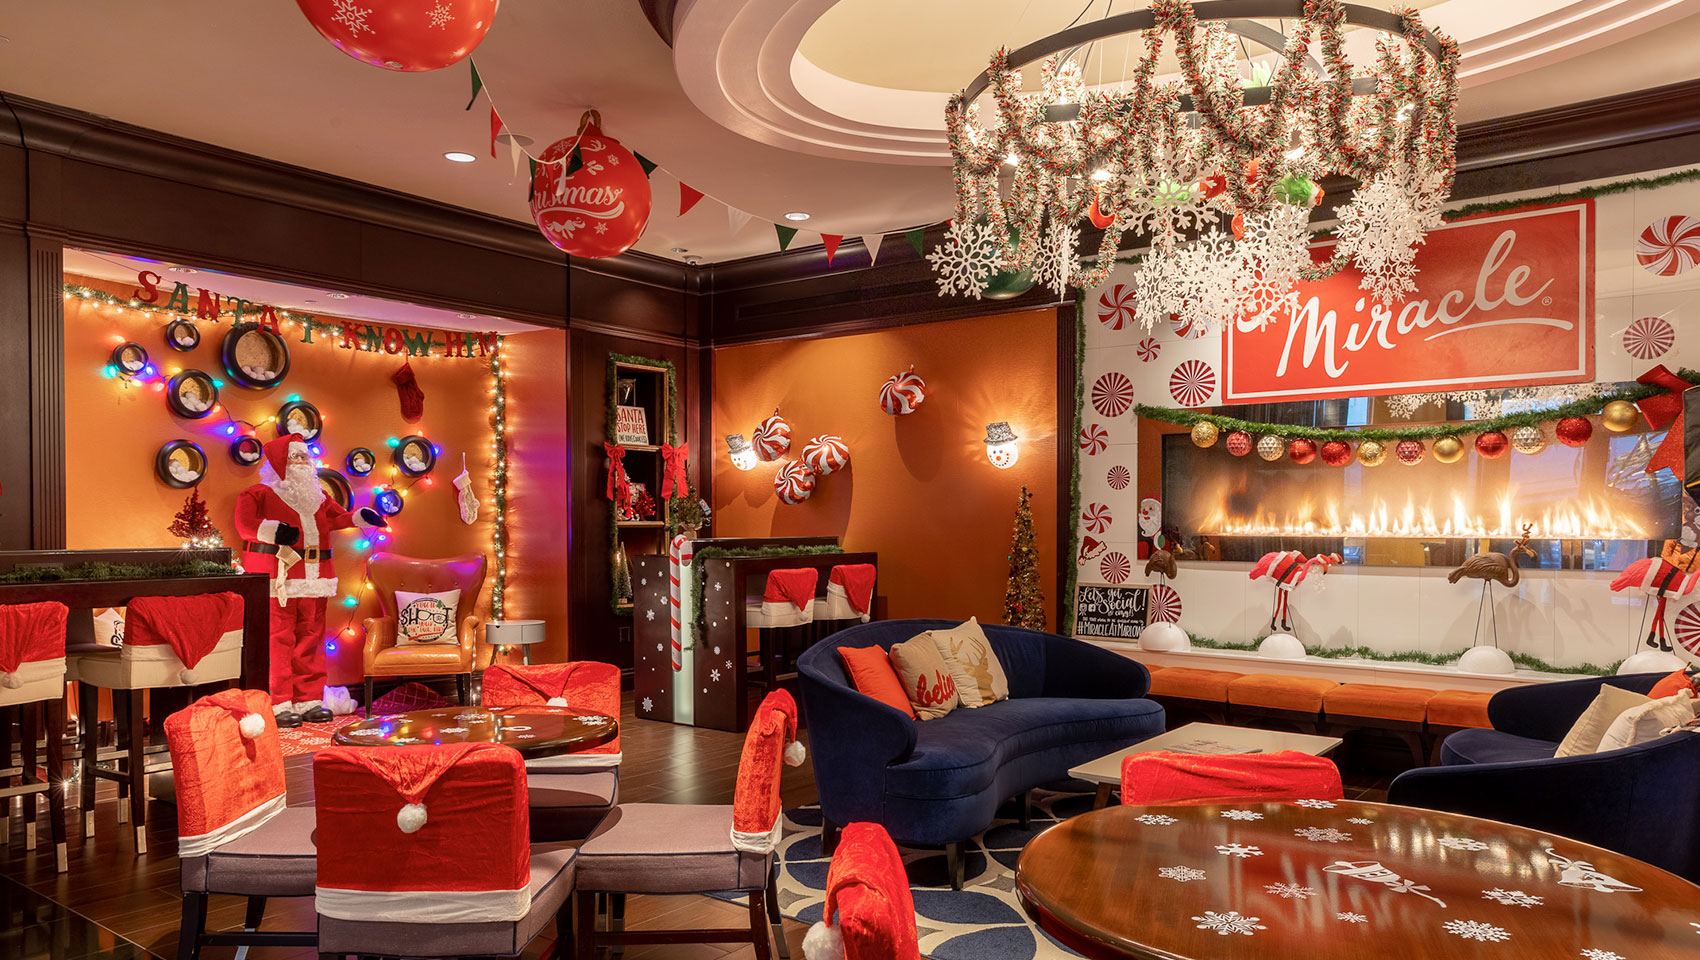 Festive image of a holiday-decorated bar in Hotel Marlowe